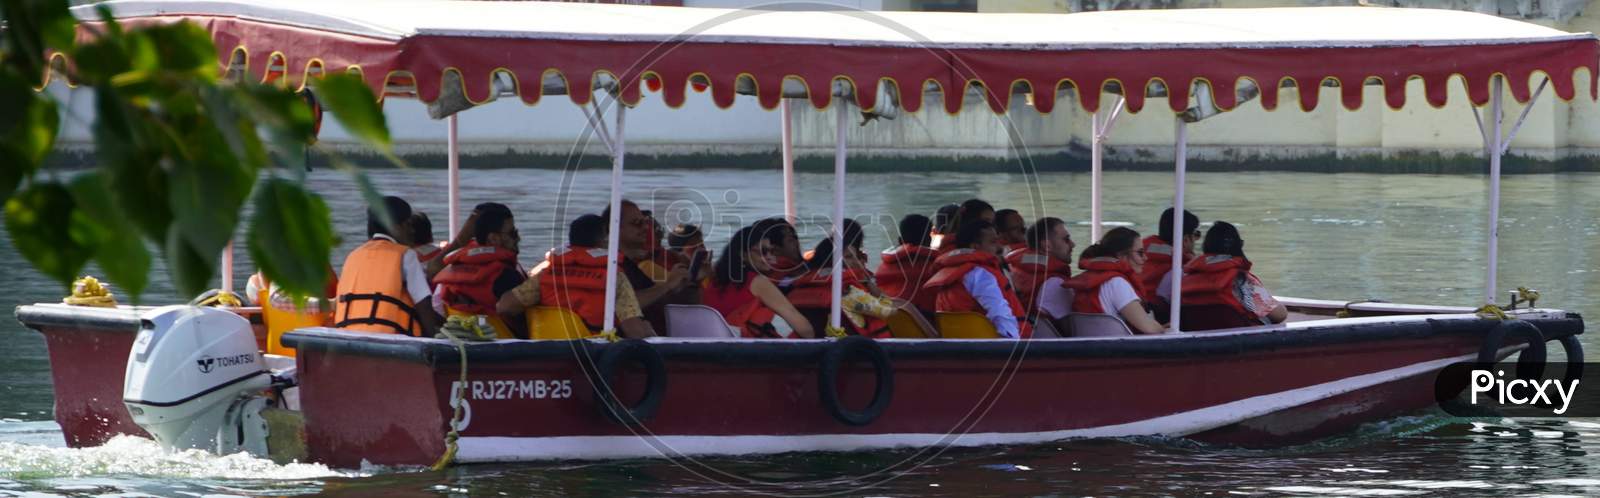 Side View Of Passenger Transportation With Boat, Water Taxi Trip. People Wearing Life Jackets Traveling In Public Ferry Boat. Group Of Passengers Sitting On Benches : Udaipur India - February 2020